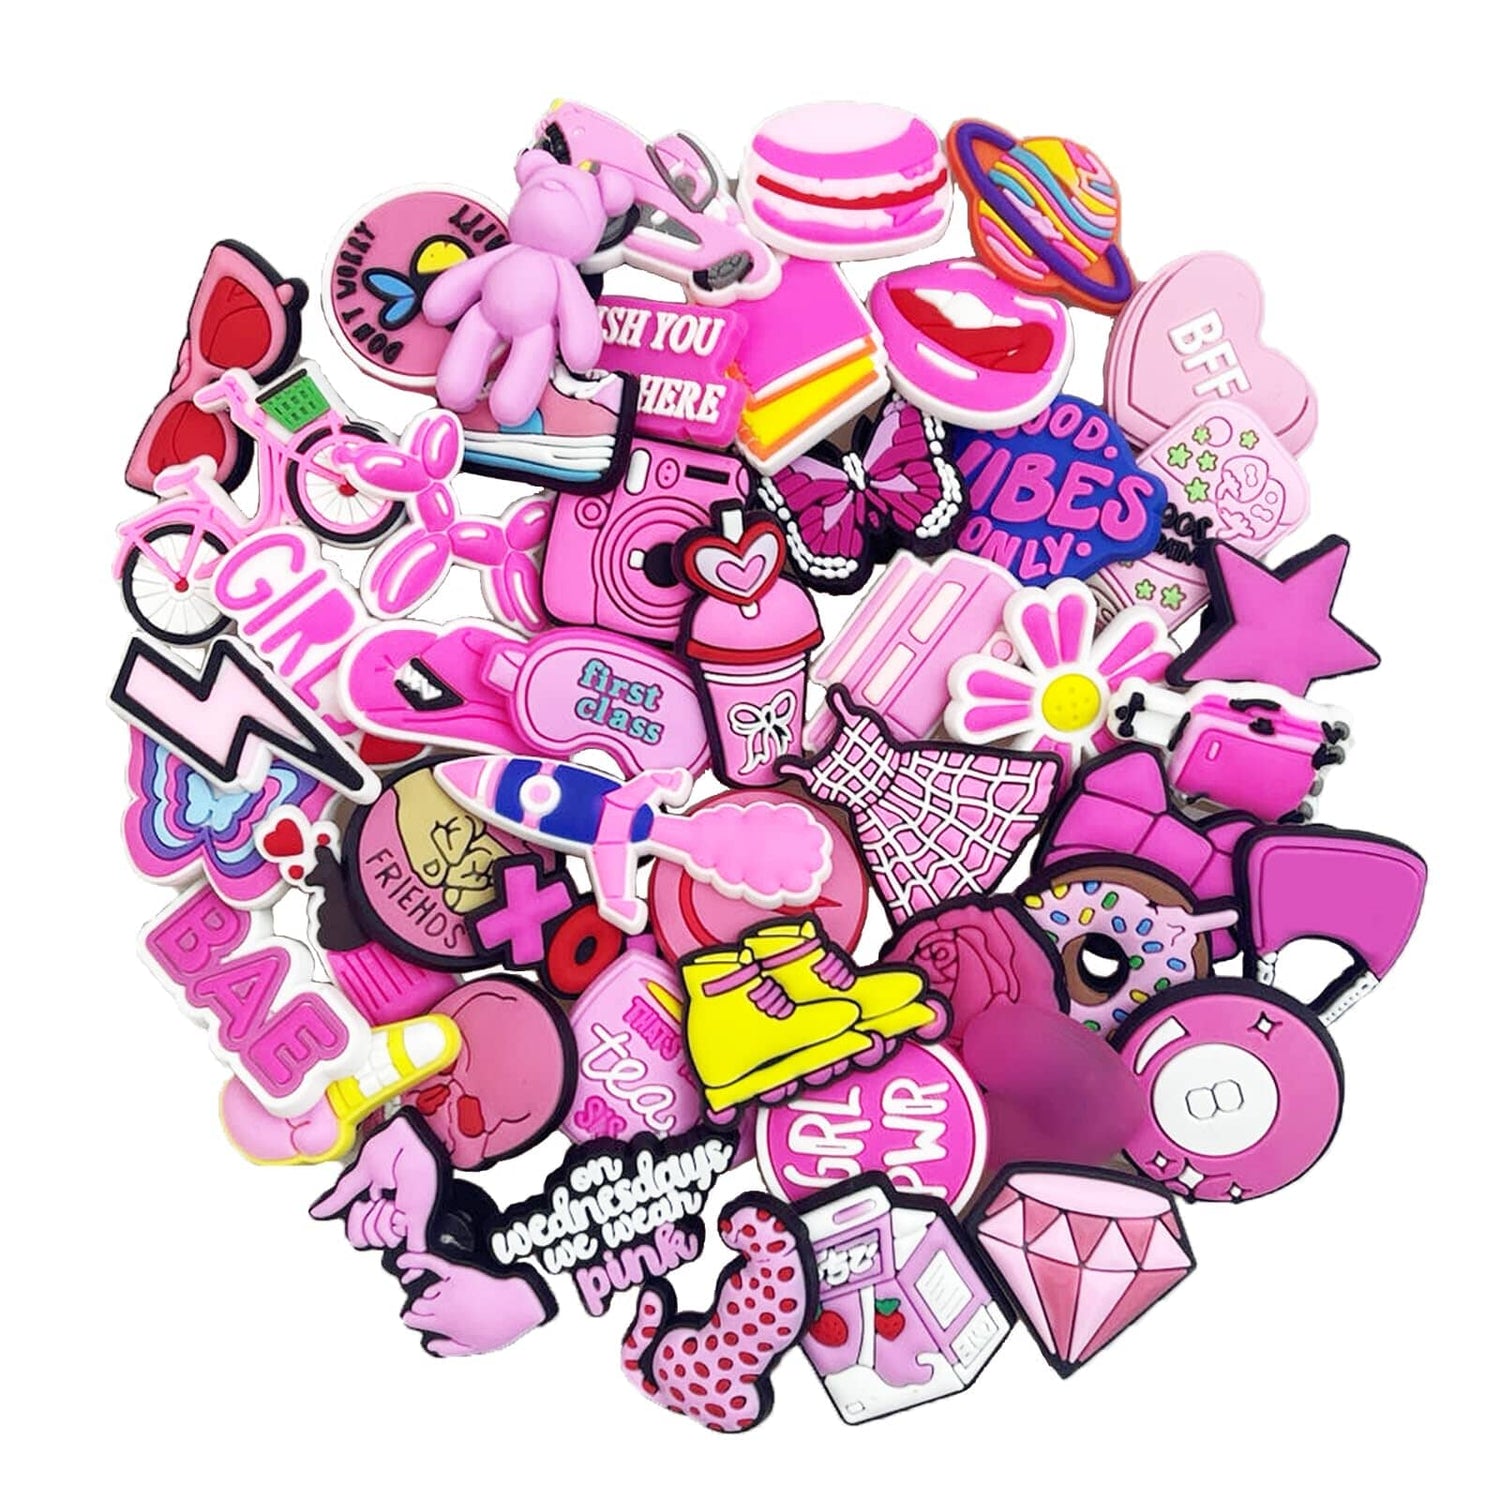 35,50 PCS Pink Shoe Charms for Girls Women, Fashion Shoe Charms Decoration for Teens Kids Adults, Cute Kawaii Pink Charms Shoe Accessories Bracelet Wristband Party Favors (35) Charms for ClipUp POSHYC 